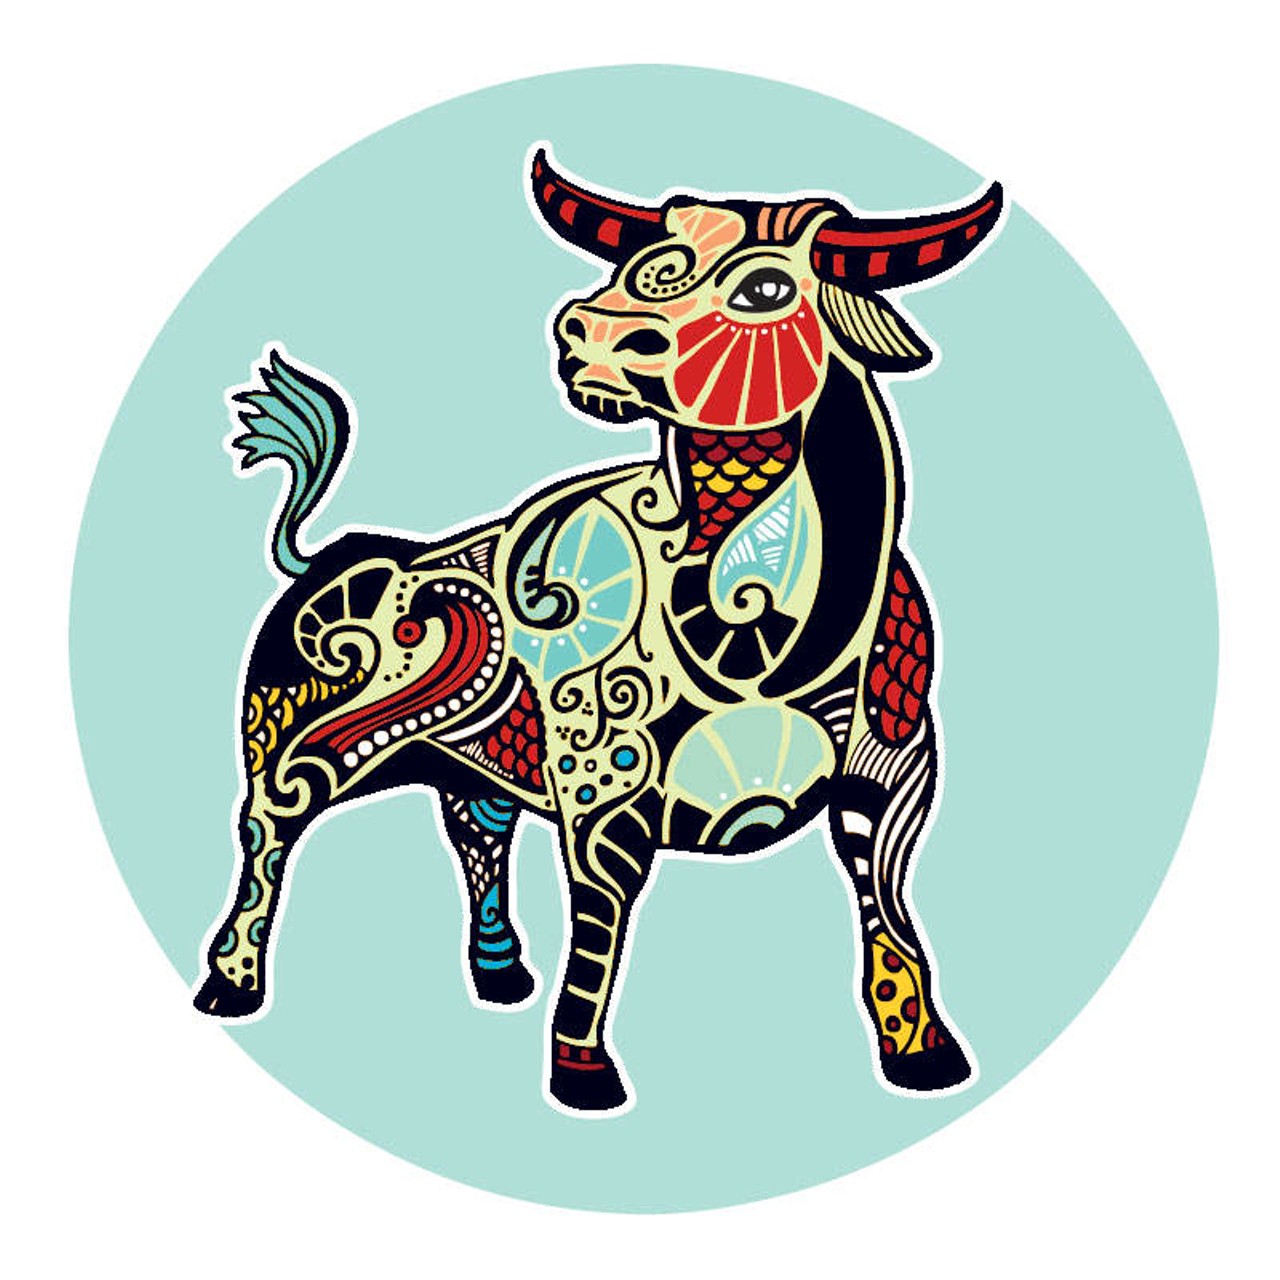 TAURUS (April 21 -May 20): 
Keeping it together when you&#146;re running on a wing and a prayer takes a clear mind and a creative approach. You&#146;ll get more from handling this yourself than you will if you keep looking for someone else to show up with a solution. With an array of forces to contend with, vigilance and faith are the name of the game. Those closest to you may need you more than you need them and can only be relied upon up to a point. As the next few weeks unfold there will be more than one opportunity to jump the boundaries that have kept you from finding your way.